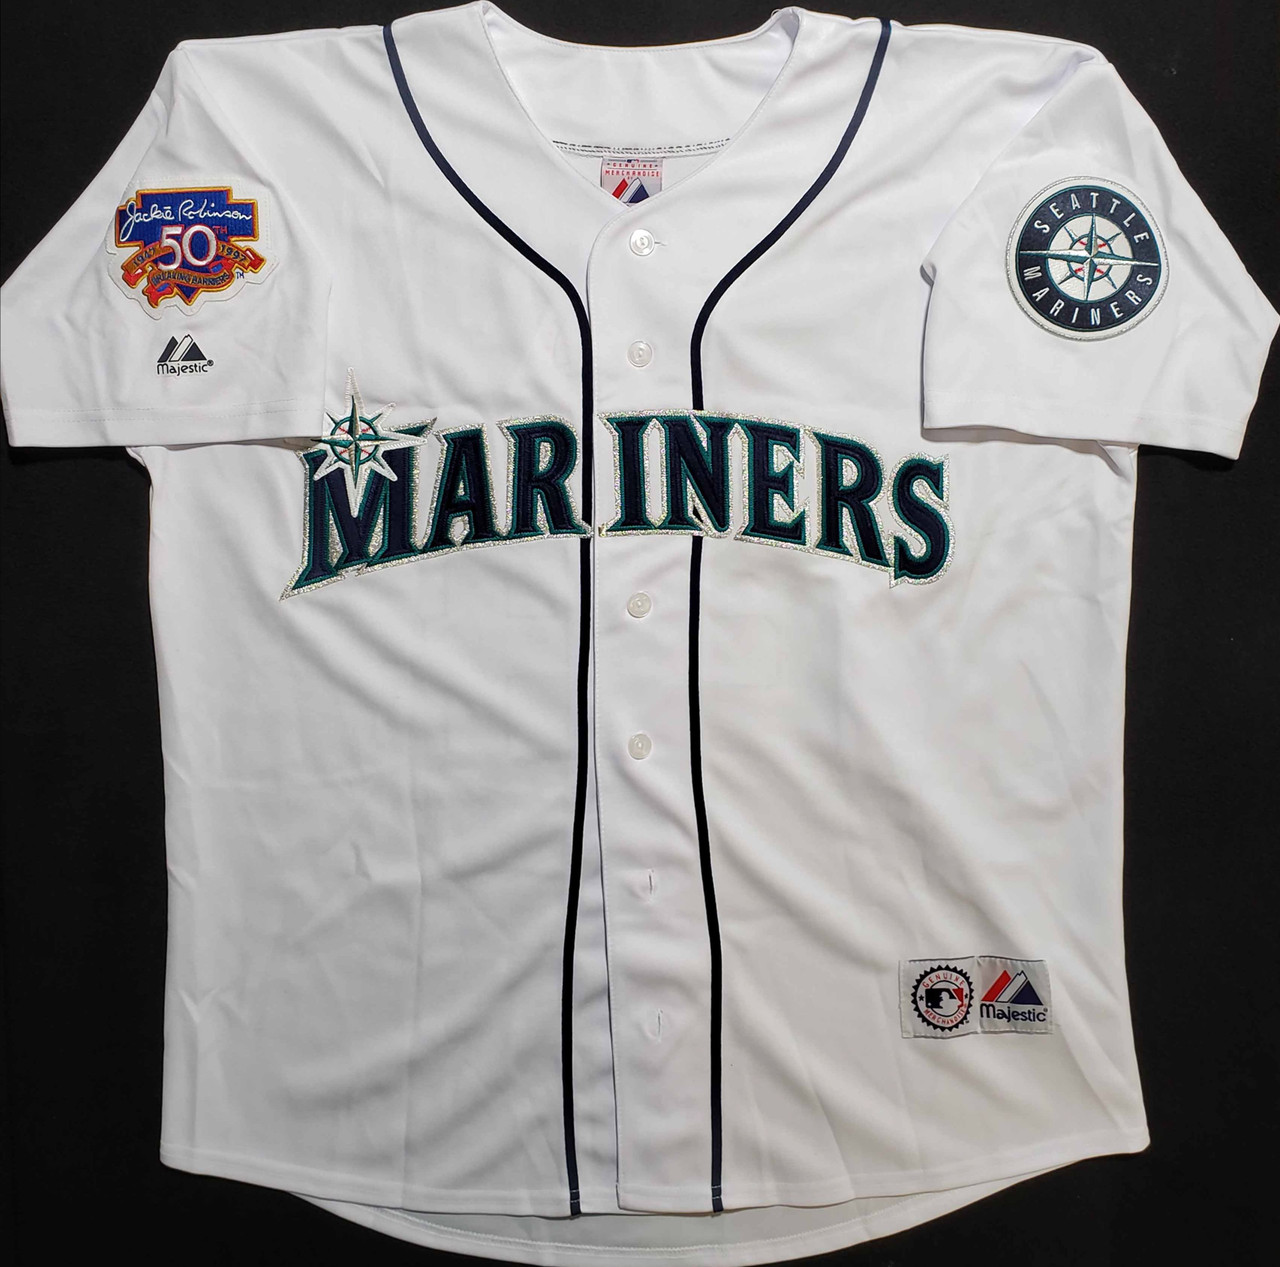 KEN GRIFFEY JR. SEATTLE MARINERS SIGNED AUTOGRAPHED JERSEY AUTO, PSA AUTH,  COA - Cardboard Picasso